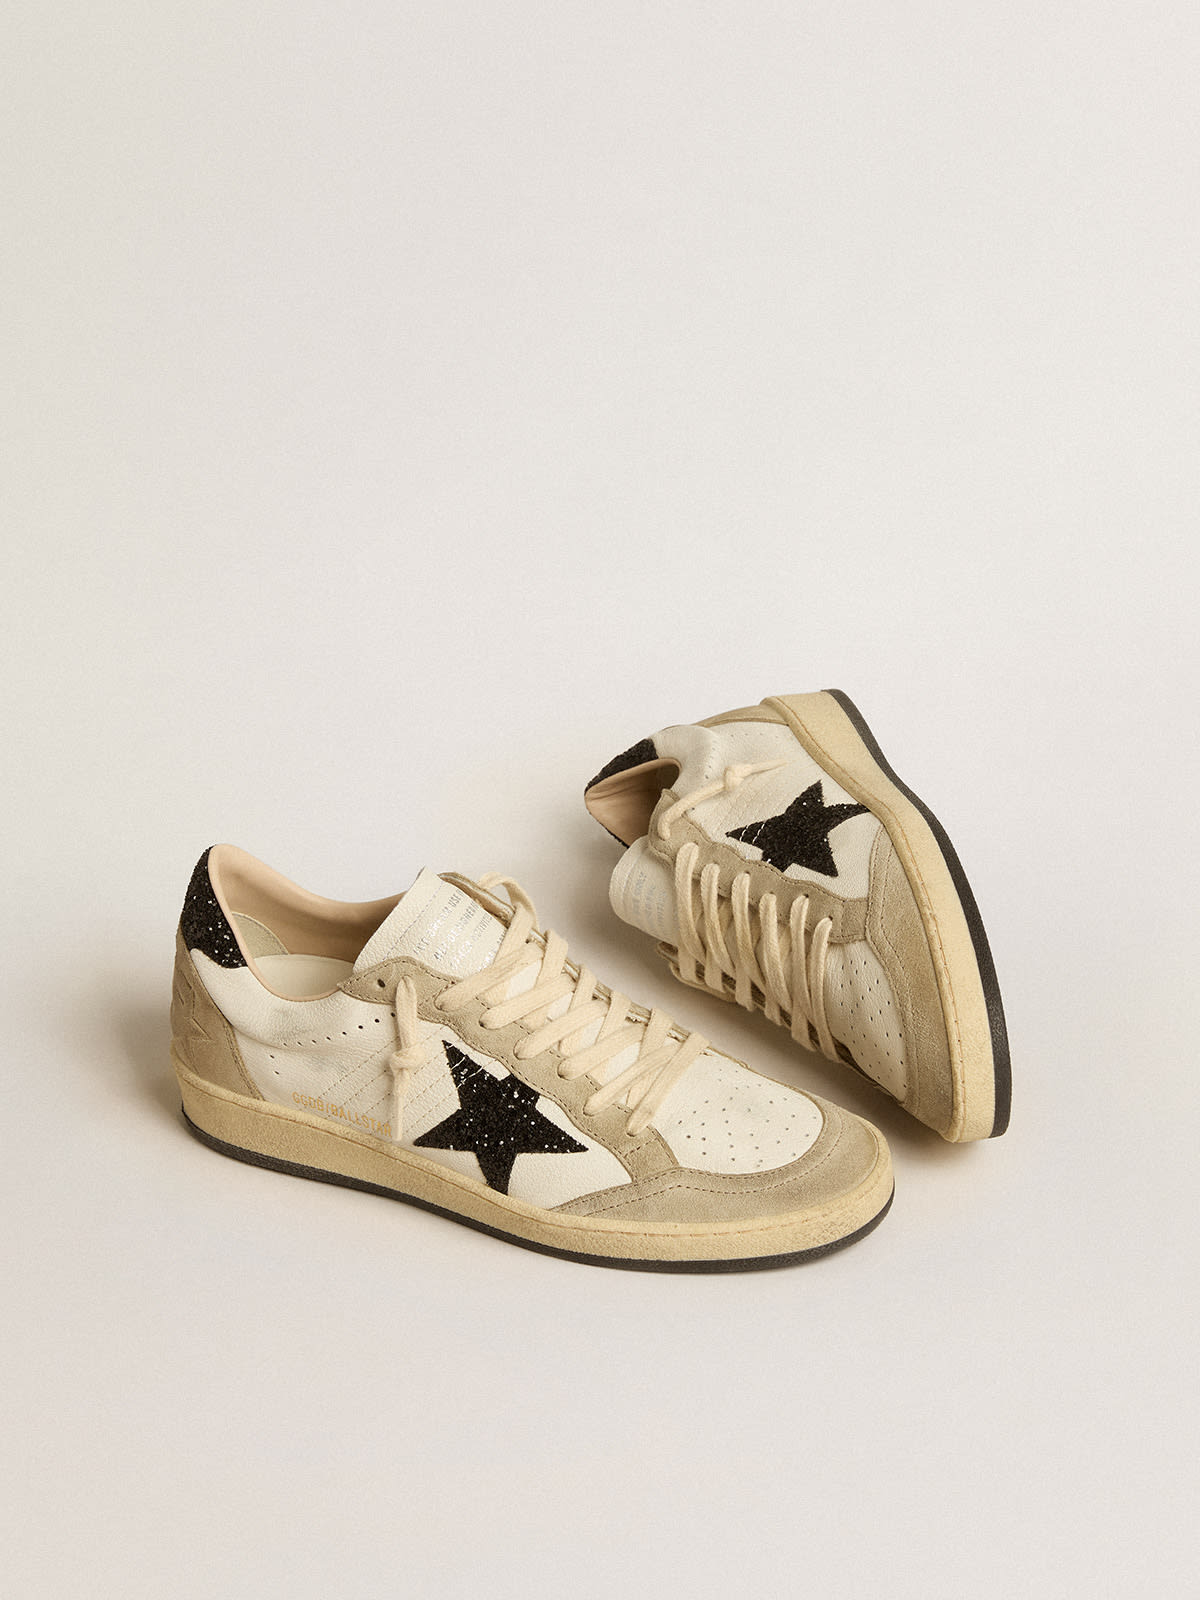 Golden Goose - Ball Star in nappa and suede with black glitter star and heel tab in 